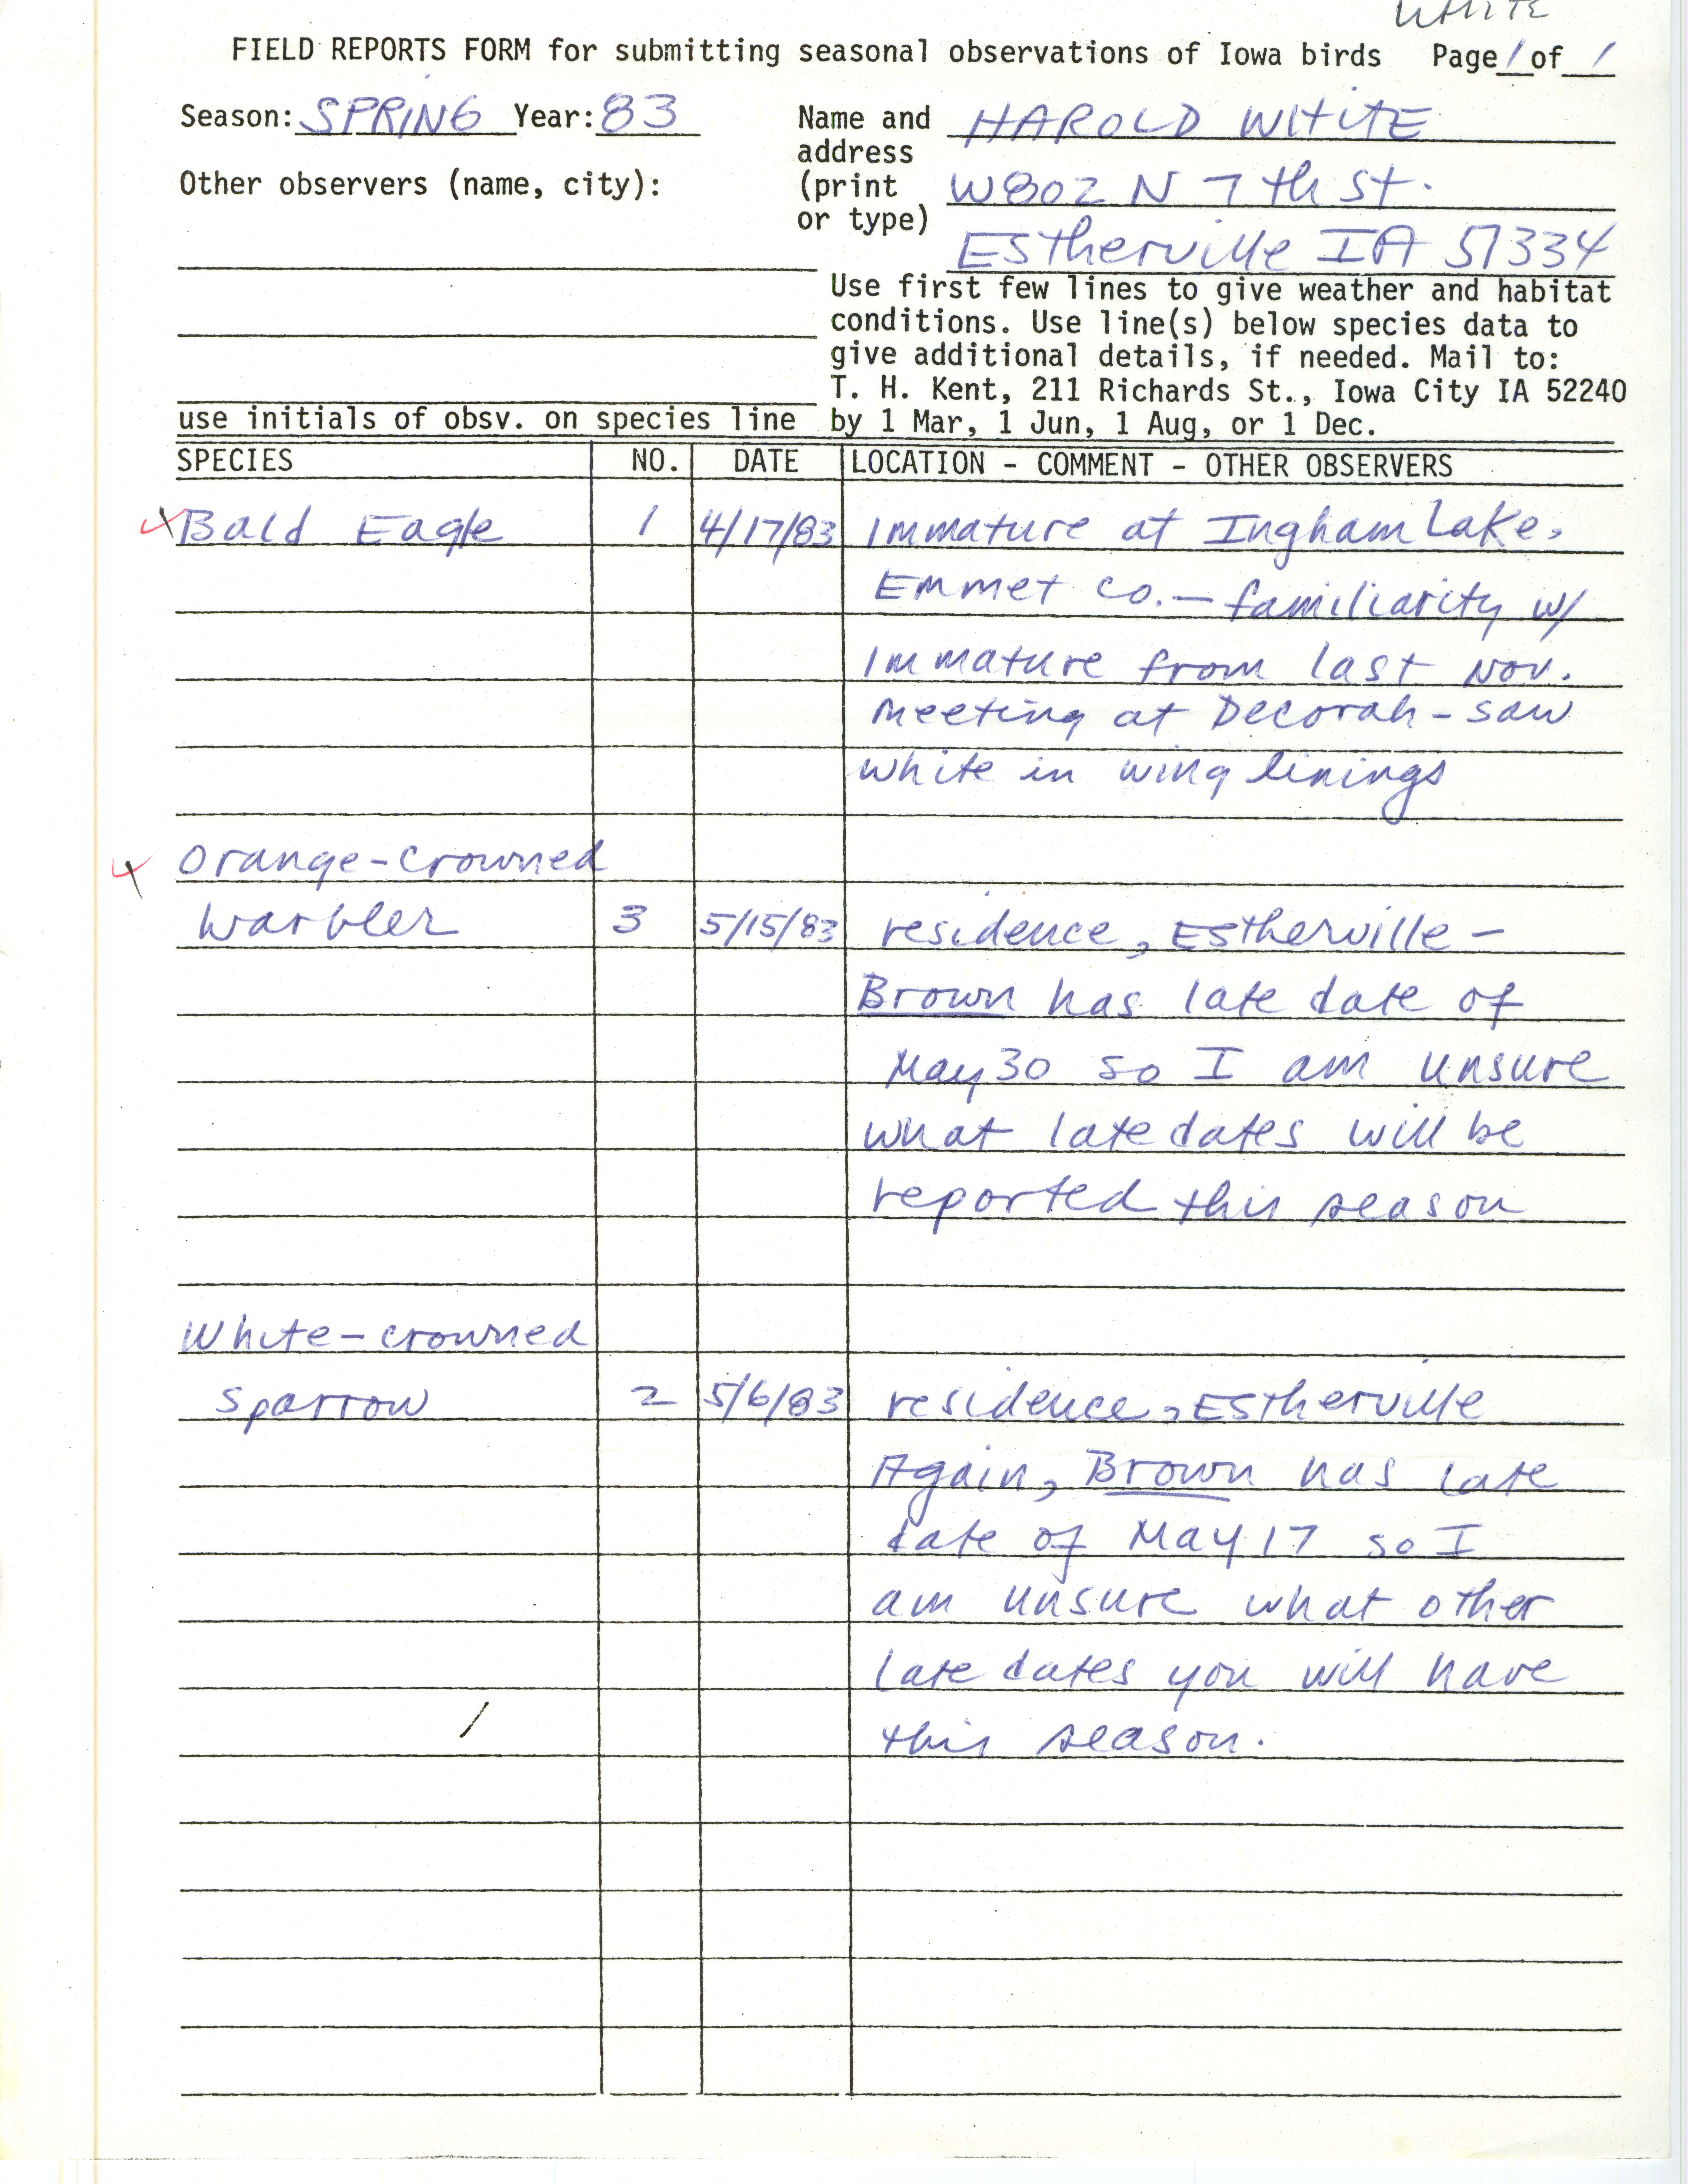 Field reports form for submitting seasonal observations of Iowa birds, Harold W. White, spring 1983